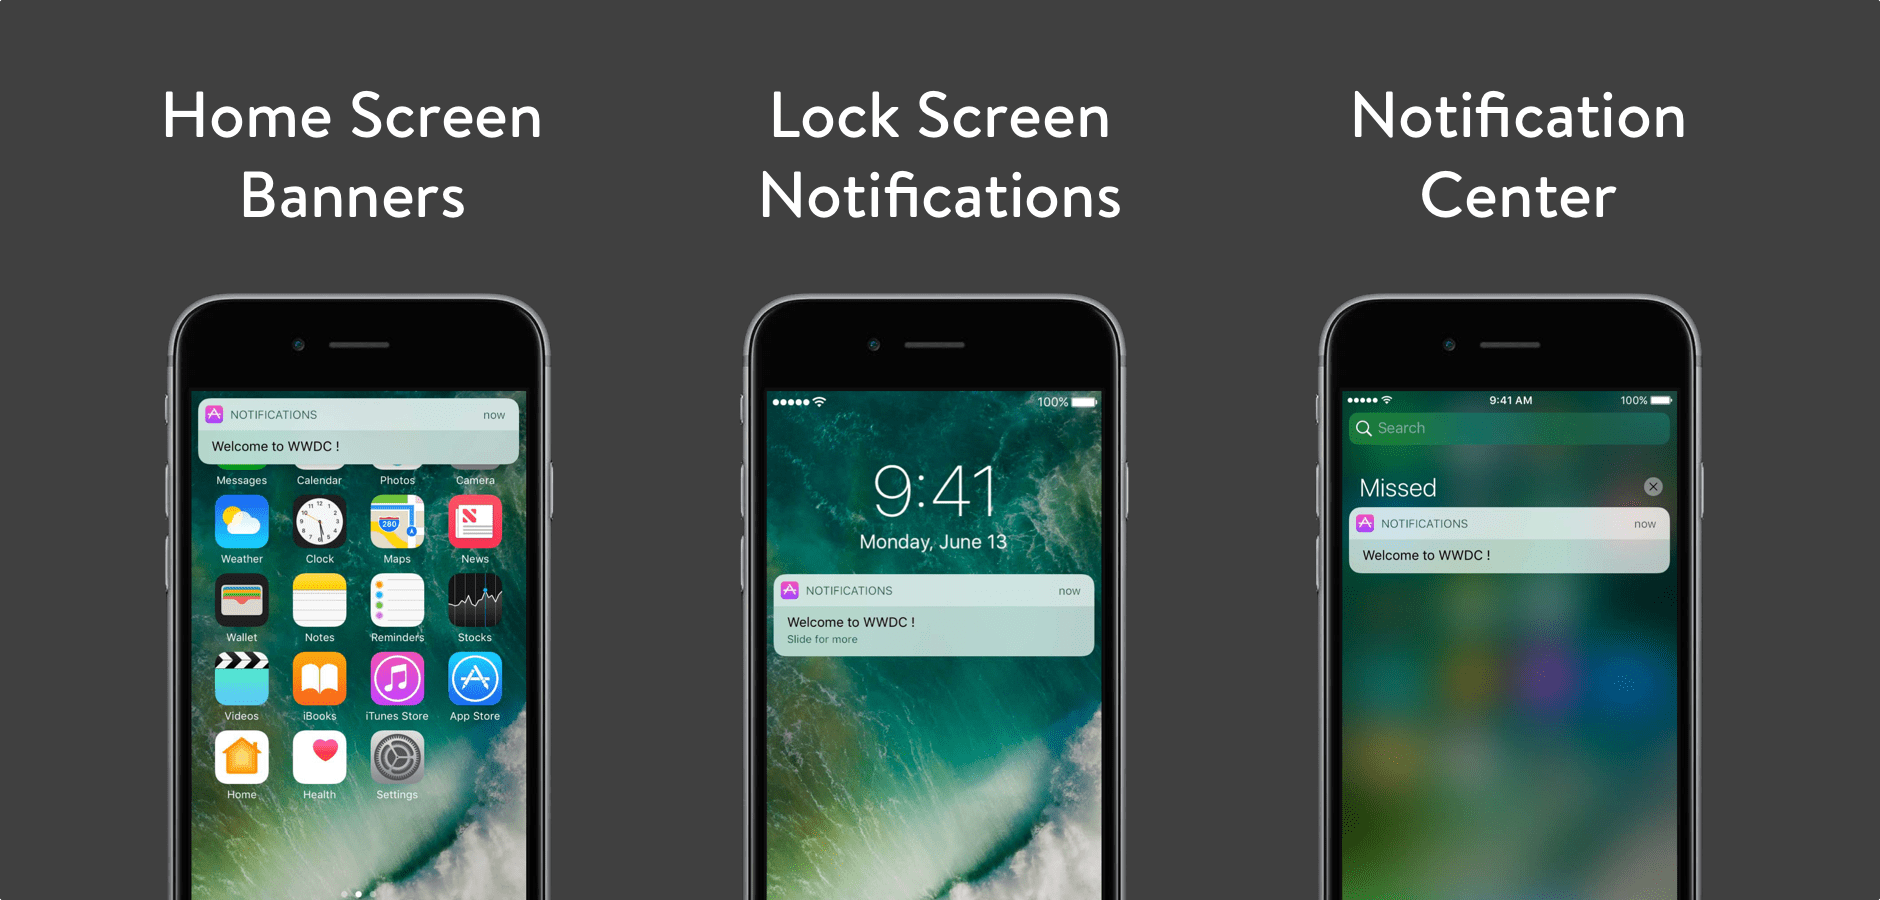 Engage users with notifications in iOS 10